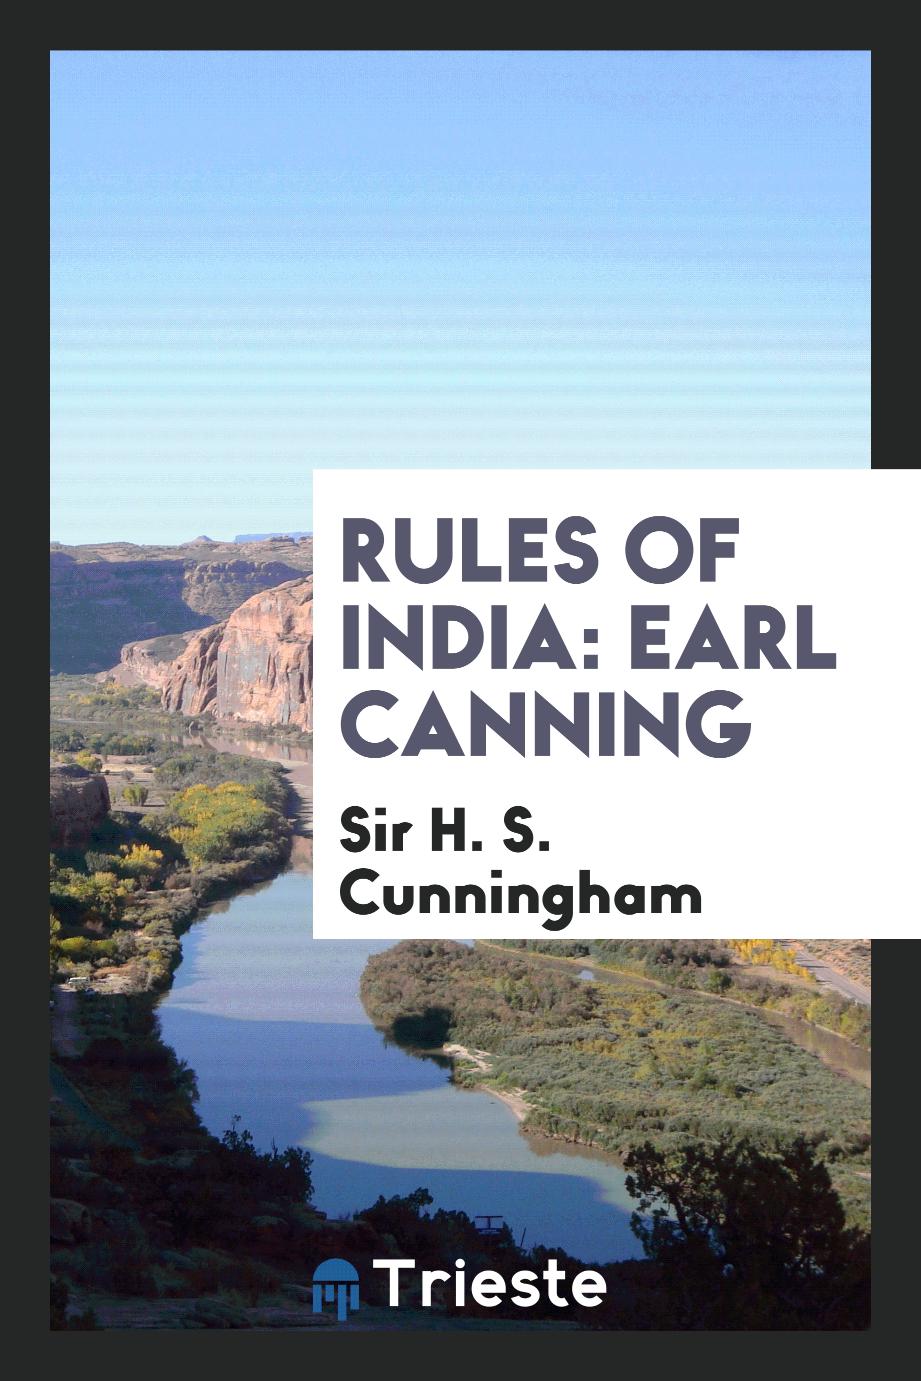 Rules of India: Earl Canning